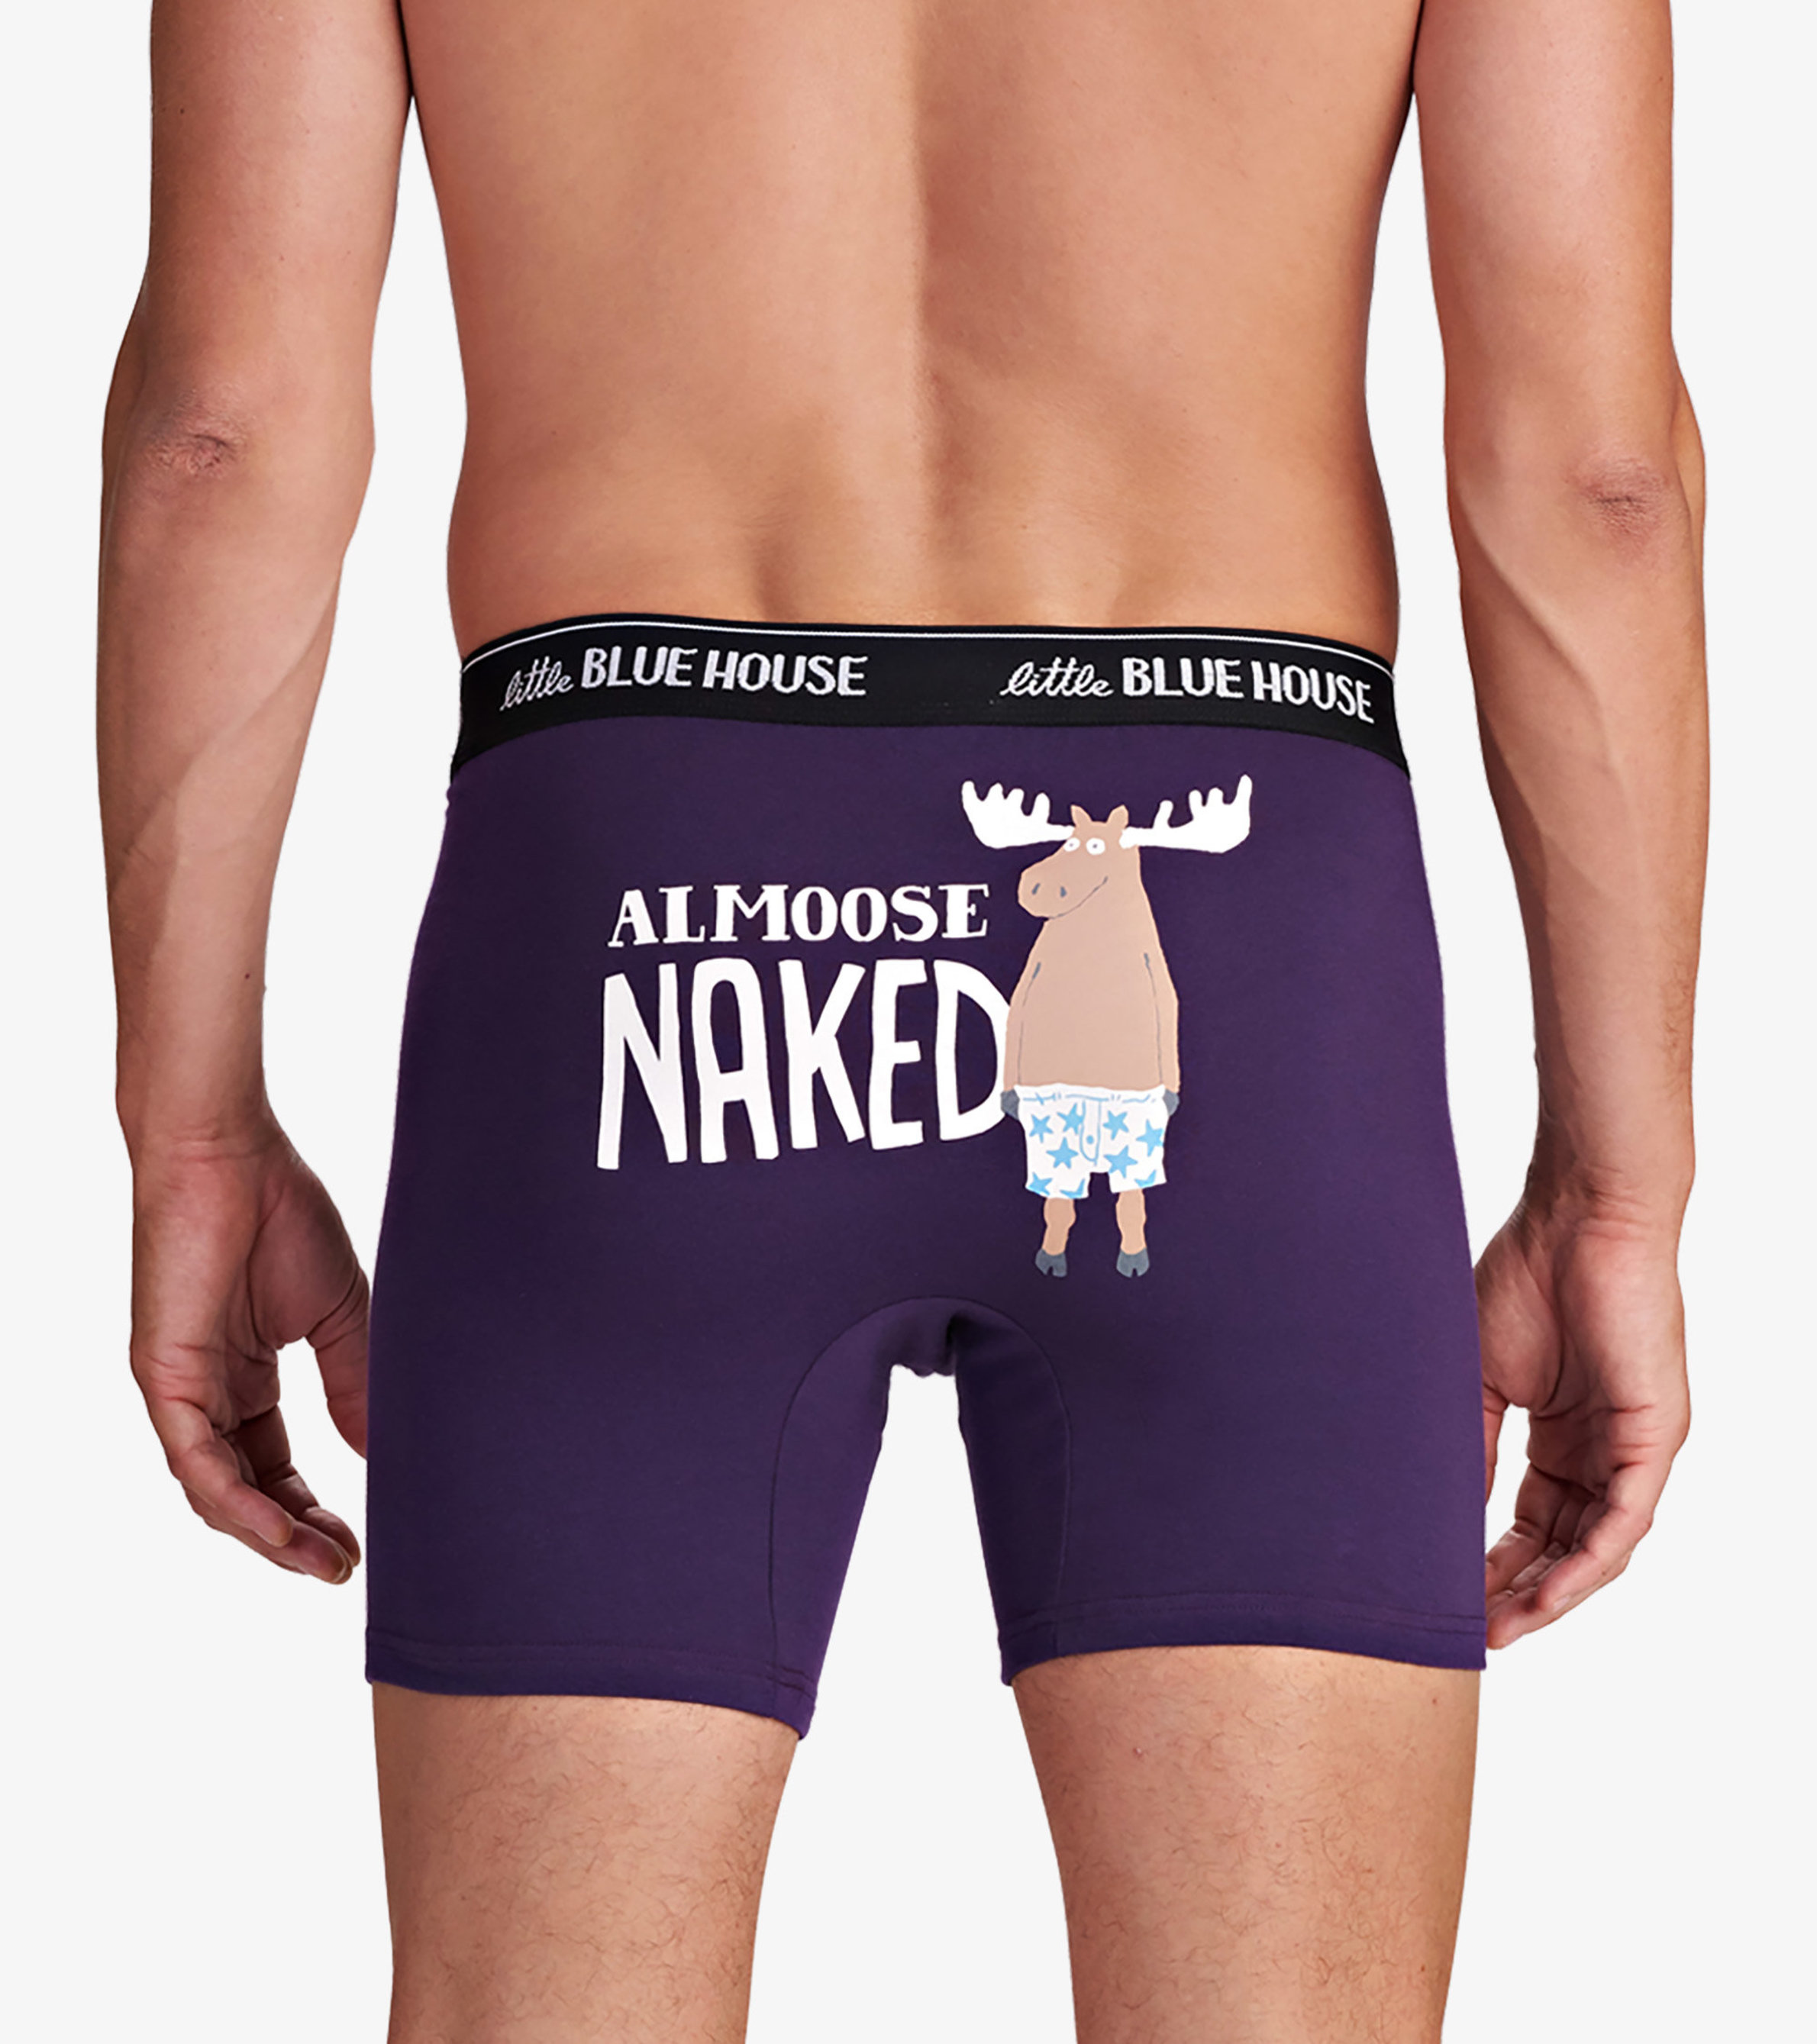 https://cdn.littlebluehouse.com/product_images/almoose-naked-mens-boxer-briefs/BXCWIMO185_jpg/pdp_zoom.jpg?c=1590164694&locale=us_en